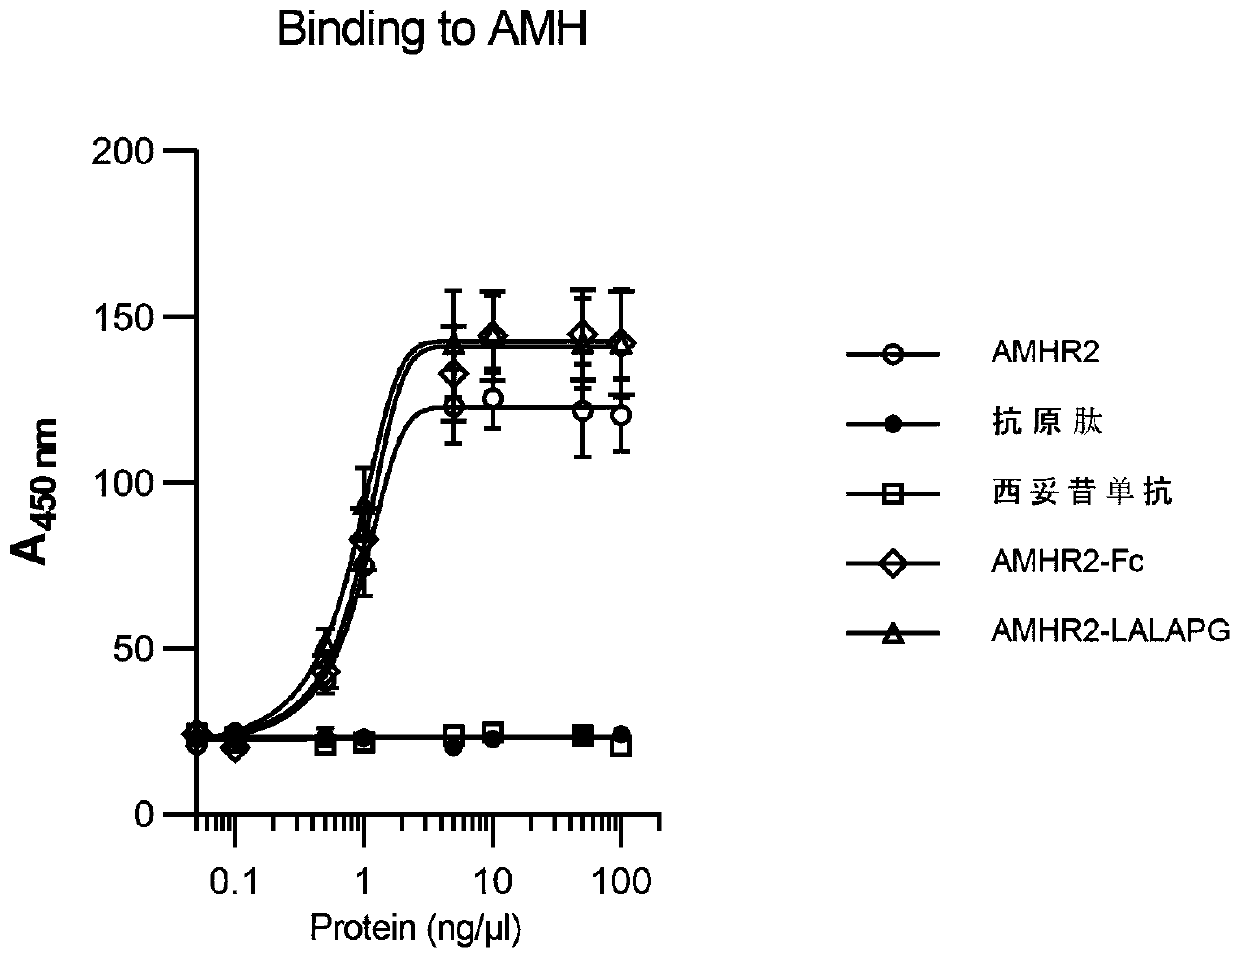 Application of AMHR2 recombinant protein or fused protein in preparation of drugs for treating AMH signal axis abnormal activation related diseases